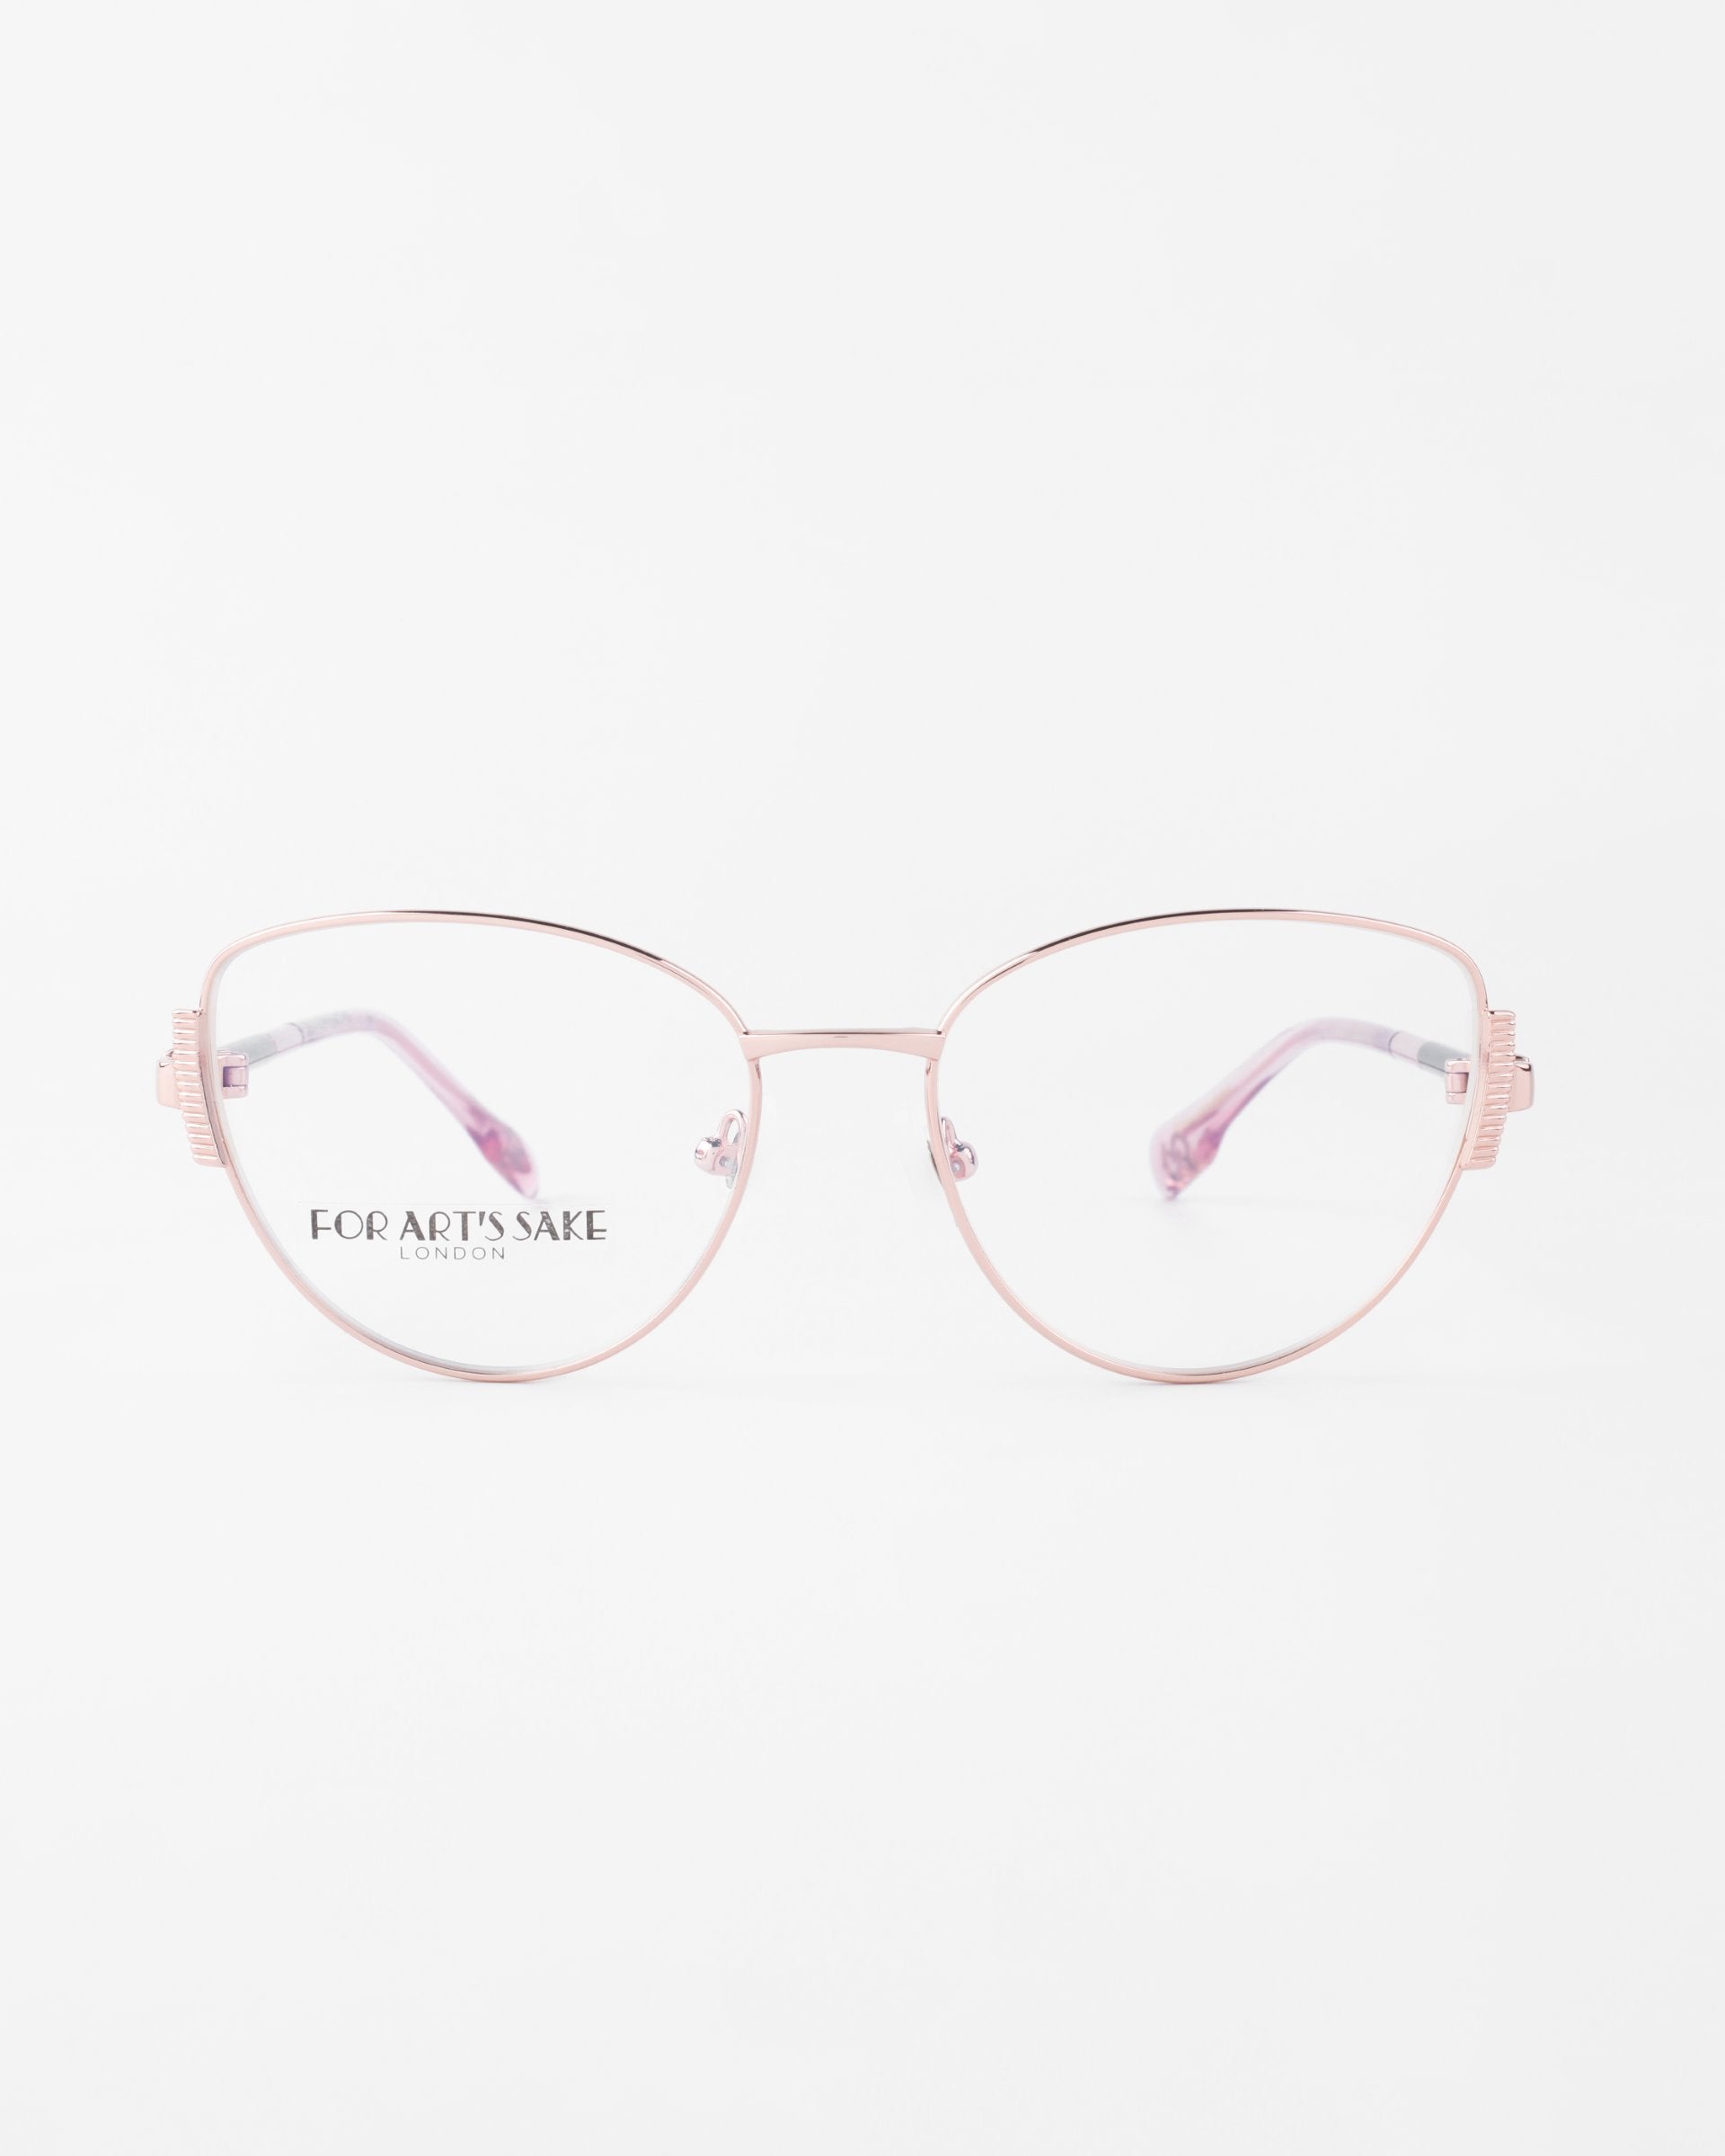 A pair of stylish, cat-eye glasses with thin, light pink metal frames and clear lenses. The brand &quot;For Art&#39;s Sake®&quot; is visible on the left lens. Featuring jade stone nose pads for added comfort, the background is white to highlight the delicate design and intricate detailing of the Dante glasses.